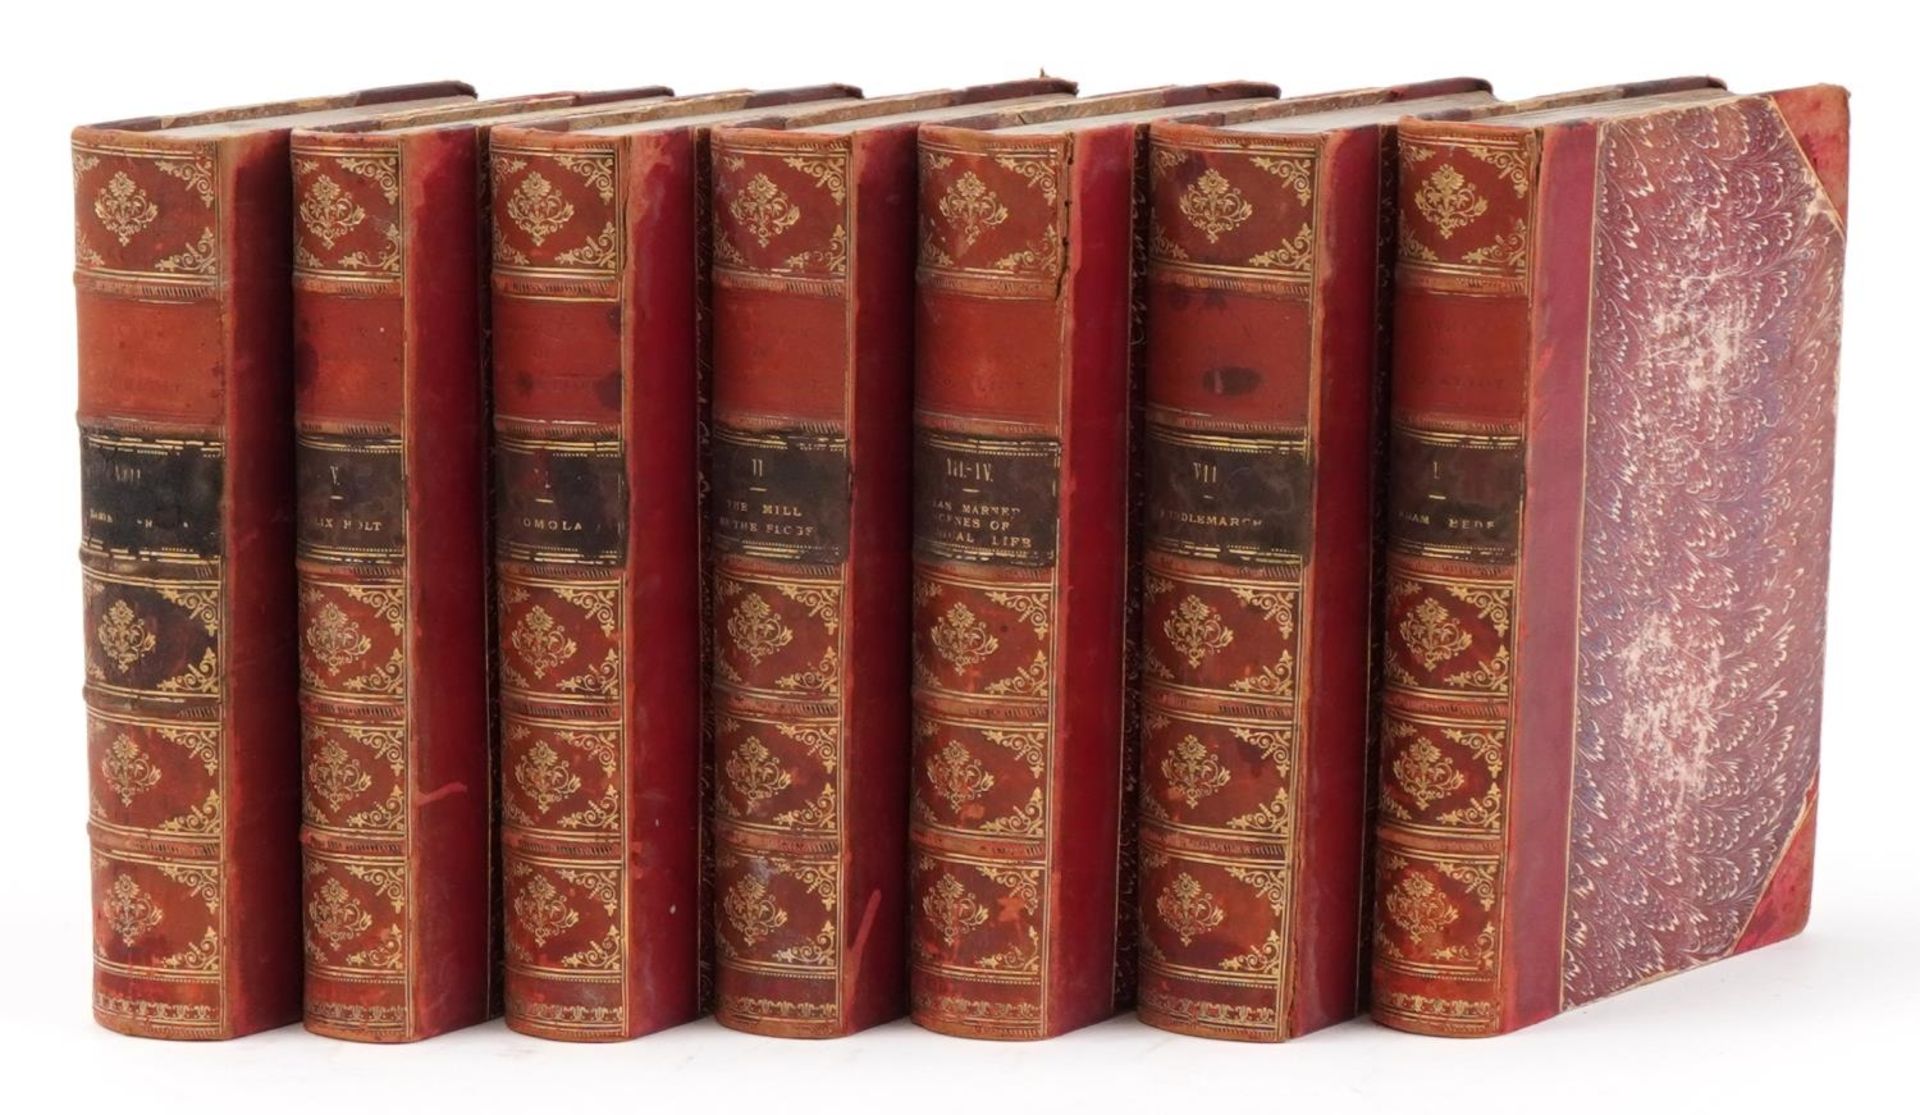 The Novels of George Eliot, set of seven 19th century leather bound hardback books including Adam